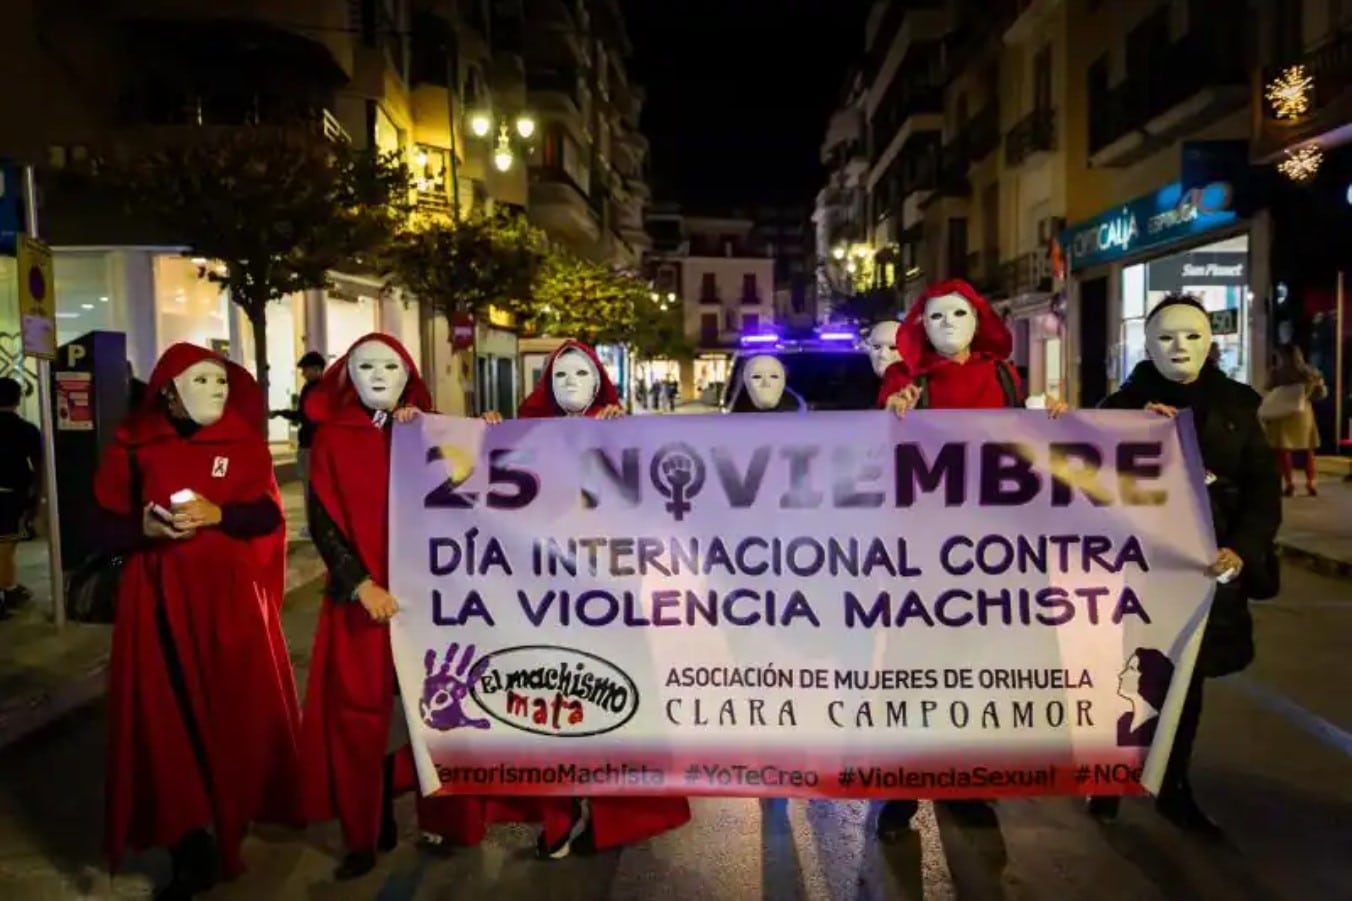 Over 5000 women currently receiving police protection in Alicante Province